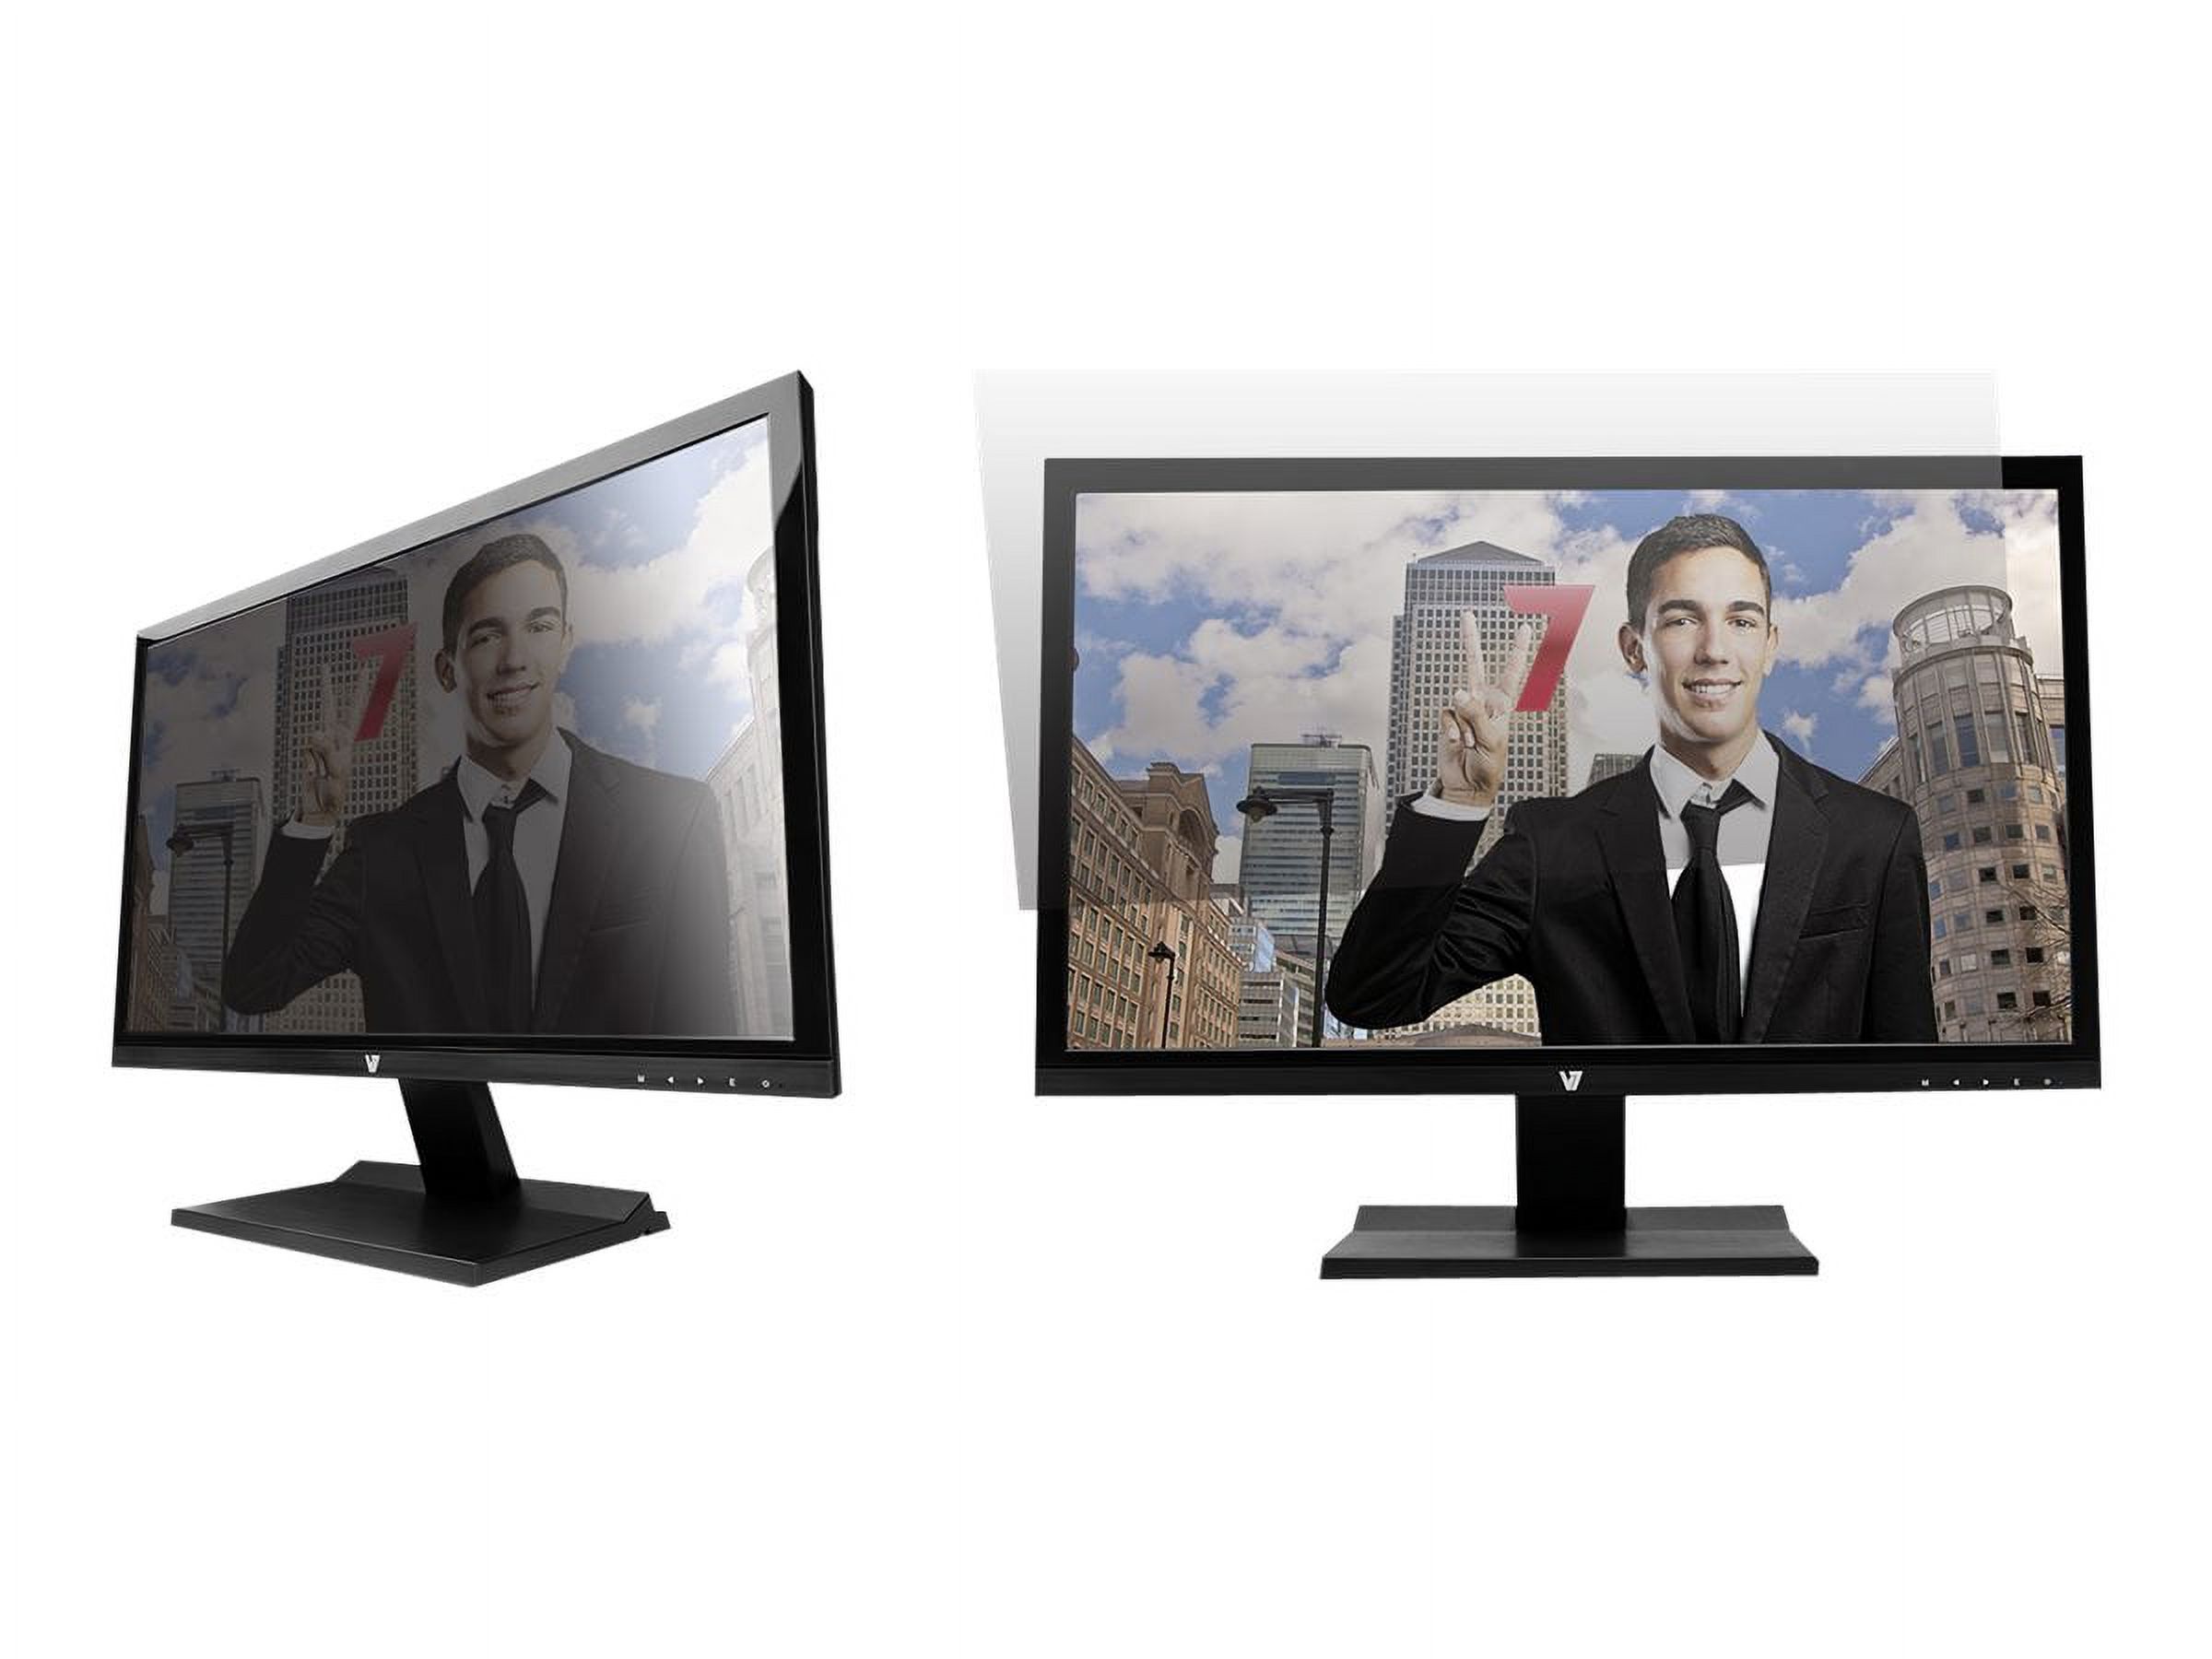 V7 19.0" Widescreen Privacy Frameless Filters for Desktop Monitors - image 2 of 2